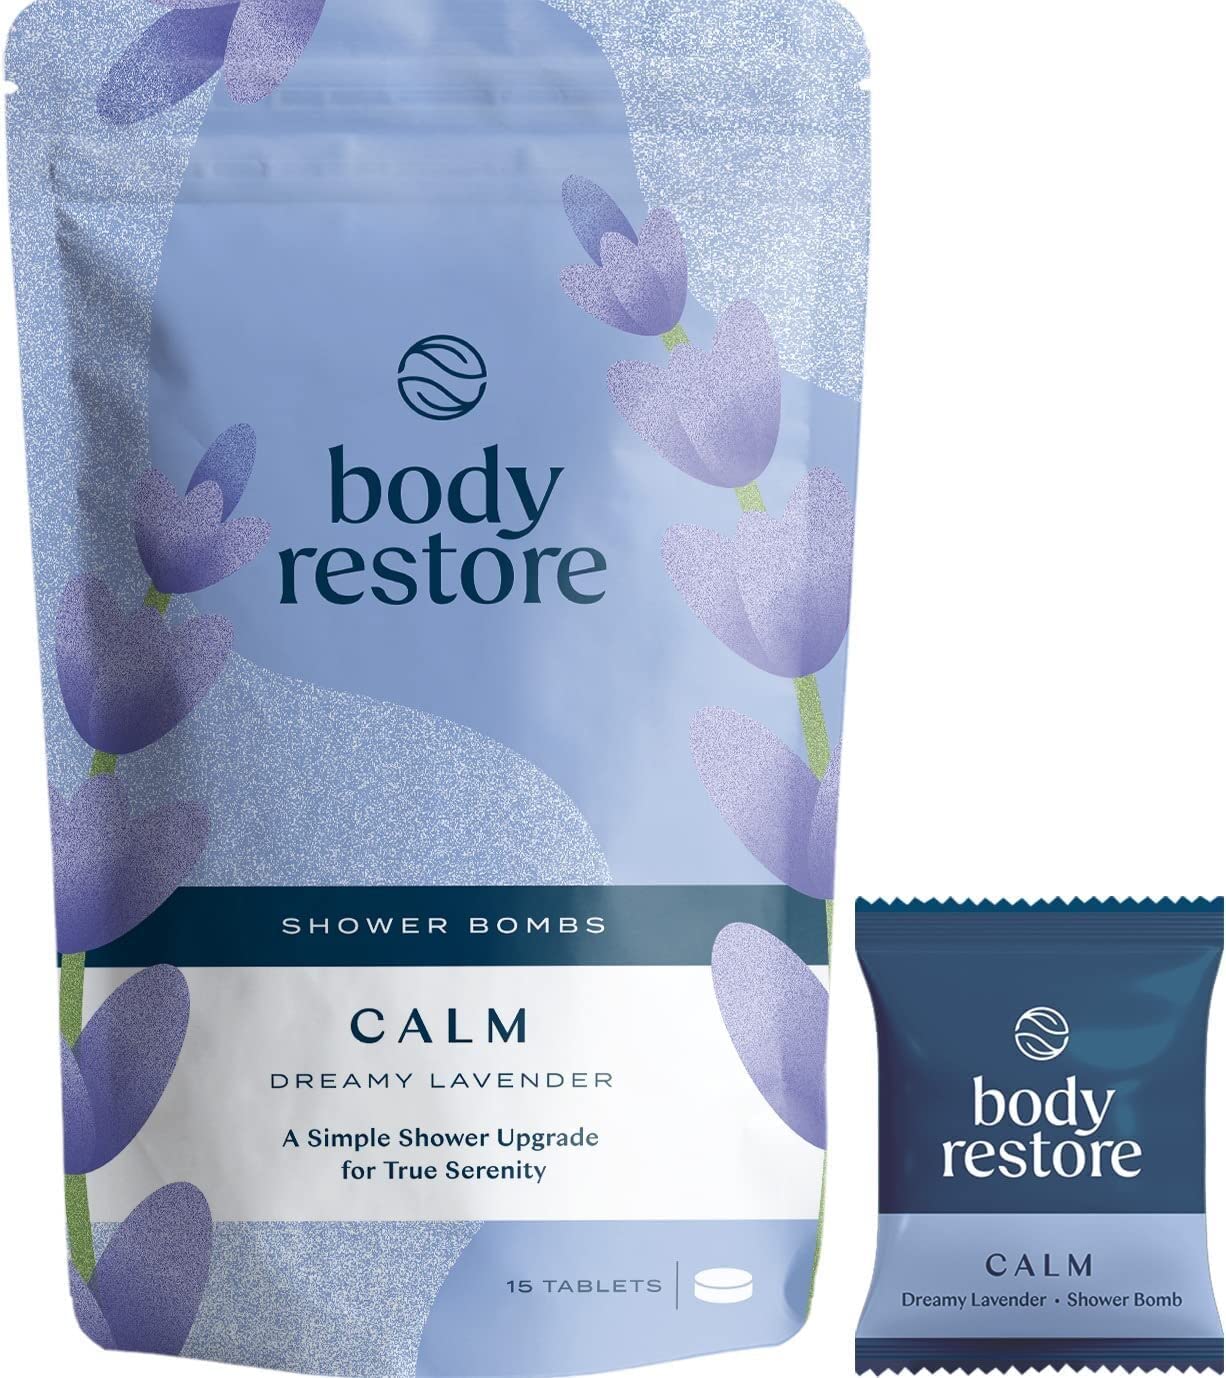 Body Restore Shower Steamers Aromatherapy (15 Packs x 3) - Gifts for Mom, Gifts for Women & Men, Shower Bath Bombs, Eucalyptus, Citrus Grove, Lavender Essential Oils, Stress Relief